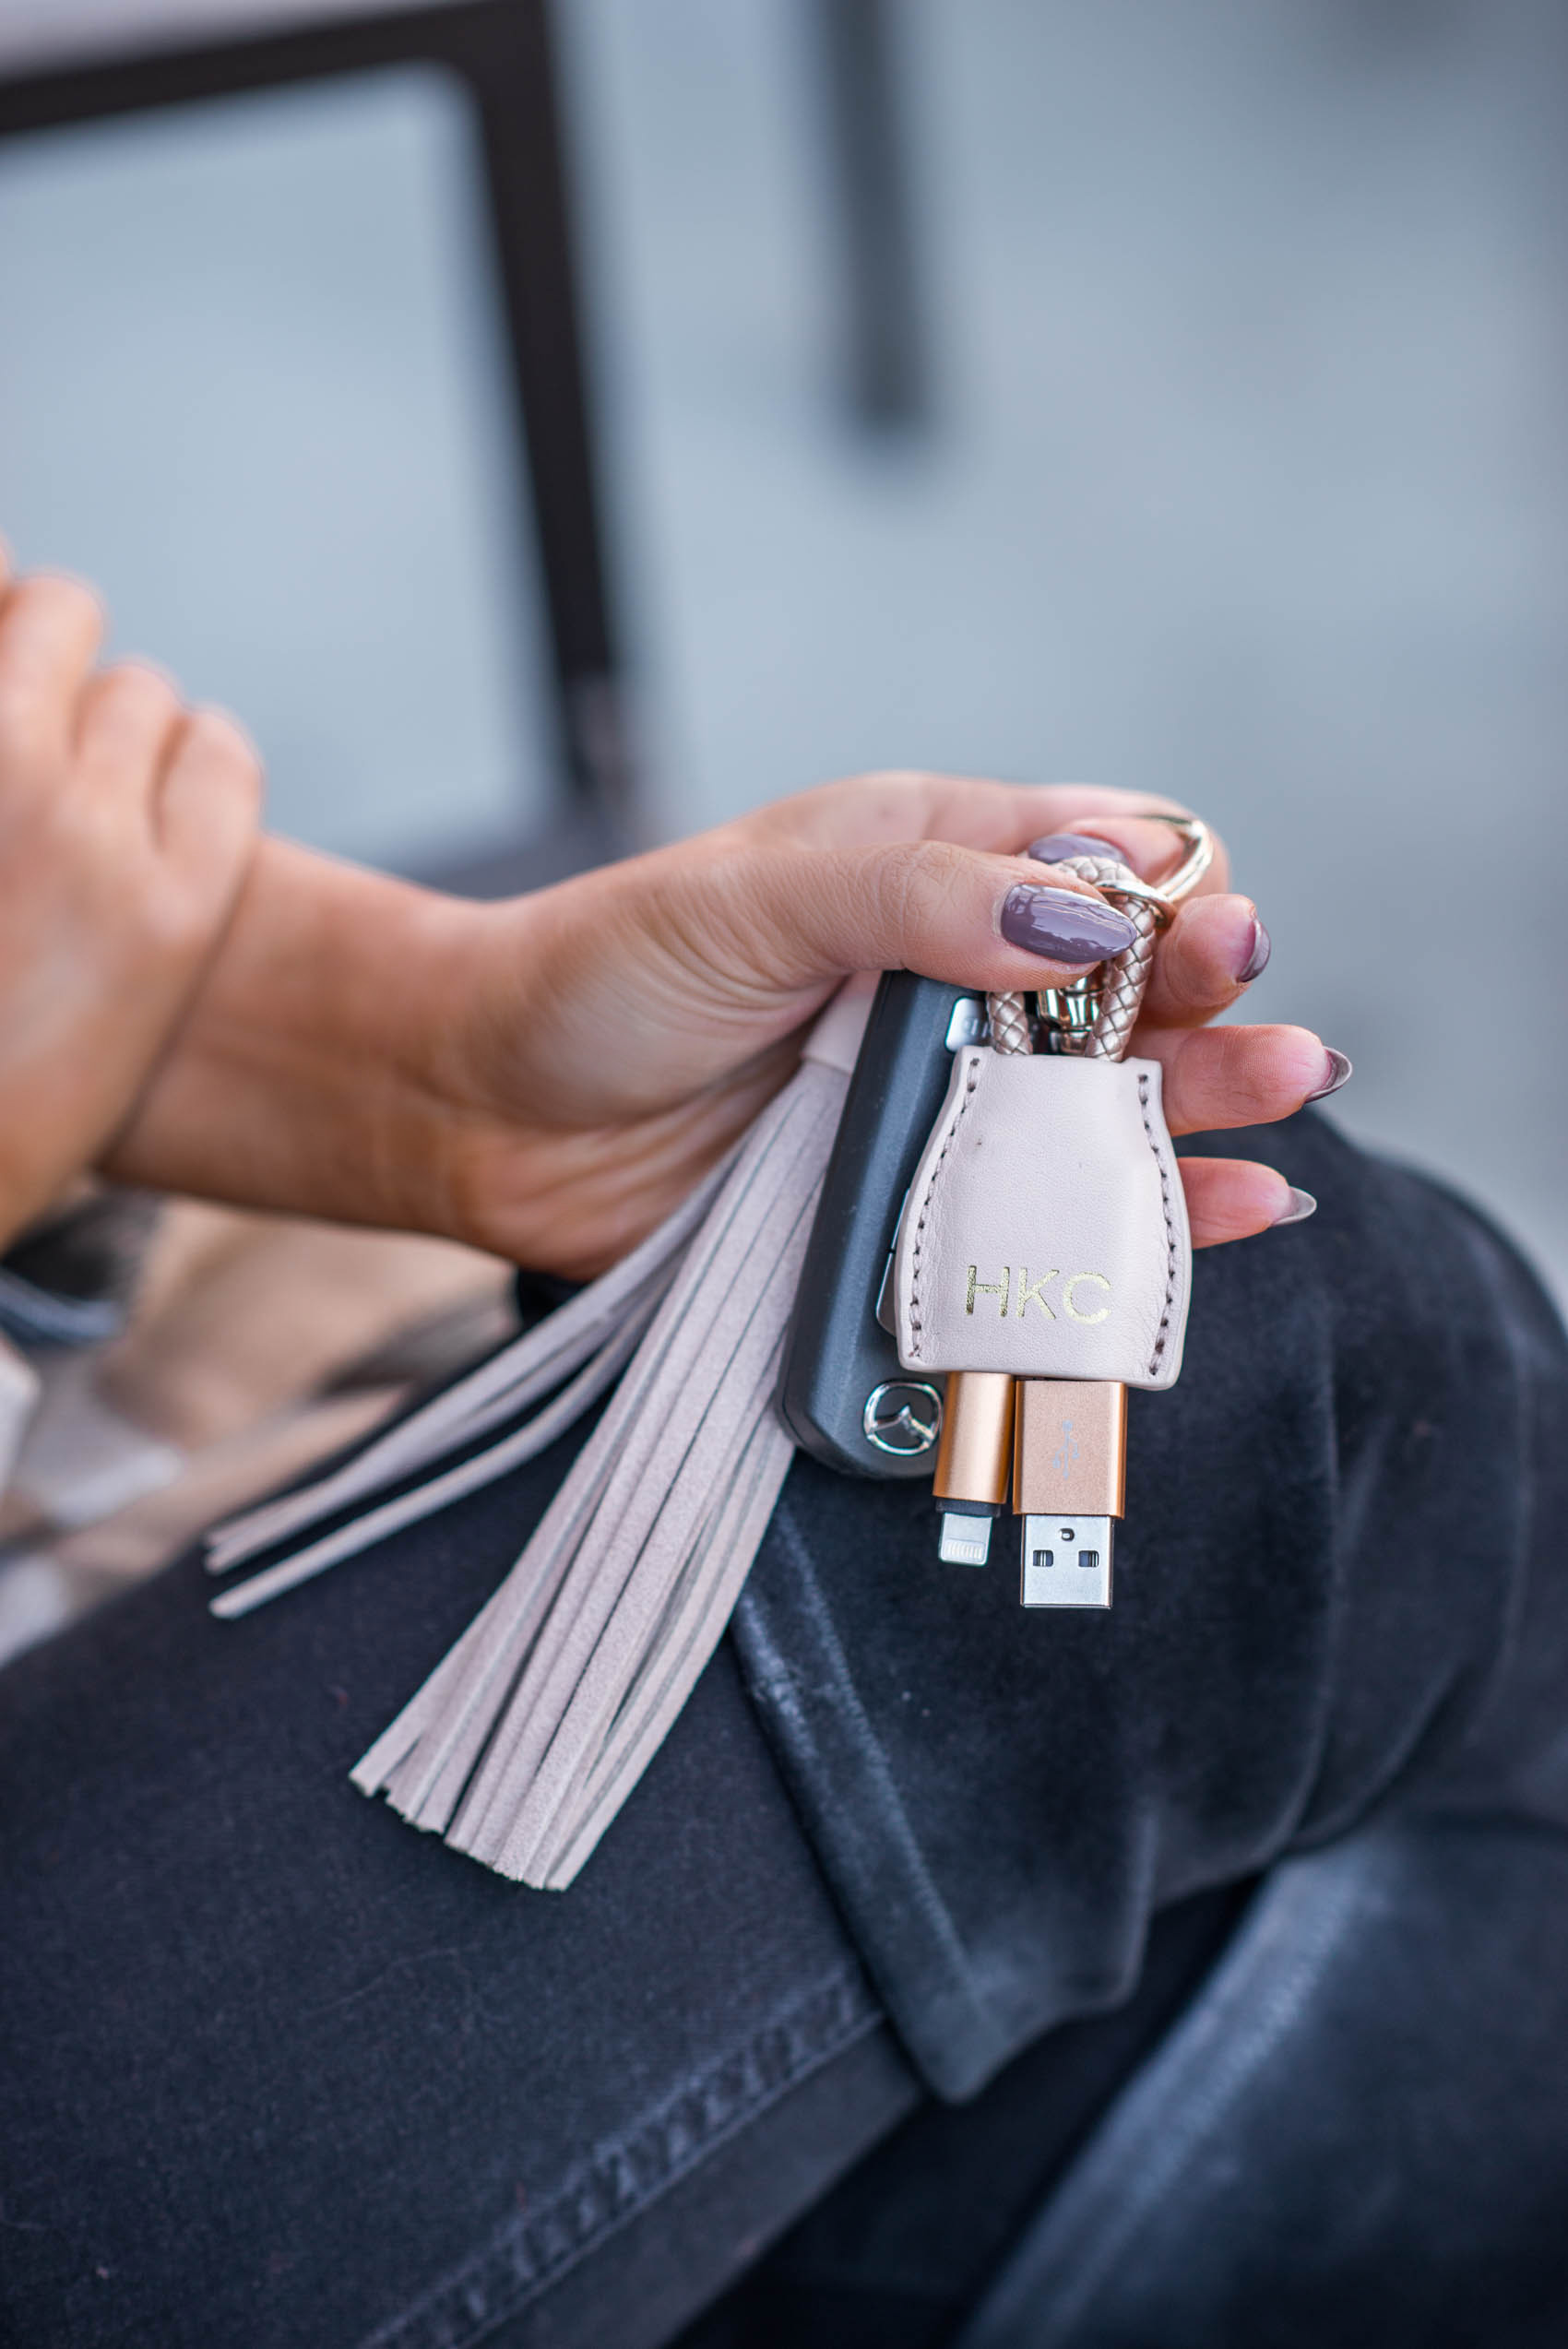 Hoang-Kim using a power-up tassel keychain from Mark & Graham as a practical gift to give this Christmas